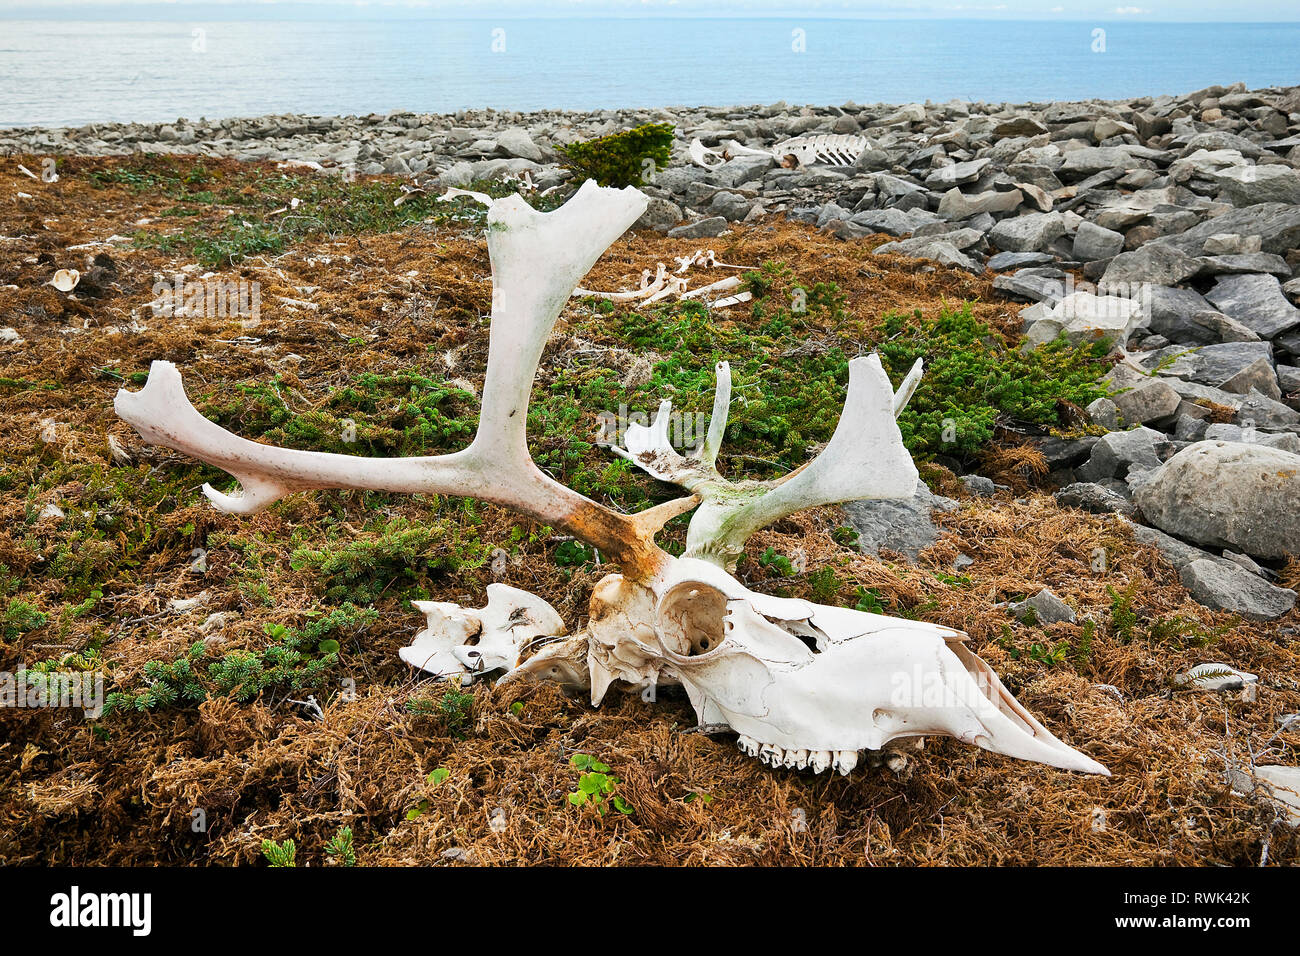 Bleached caribou skull and antlers on bed of moss near a rocky beach at Dog Peninsula in Bird Cove, Western Newfoundland, Canada Stock Photo